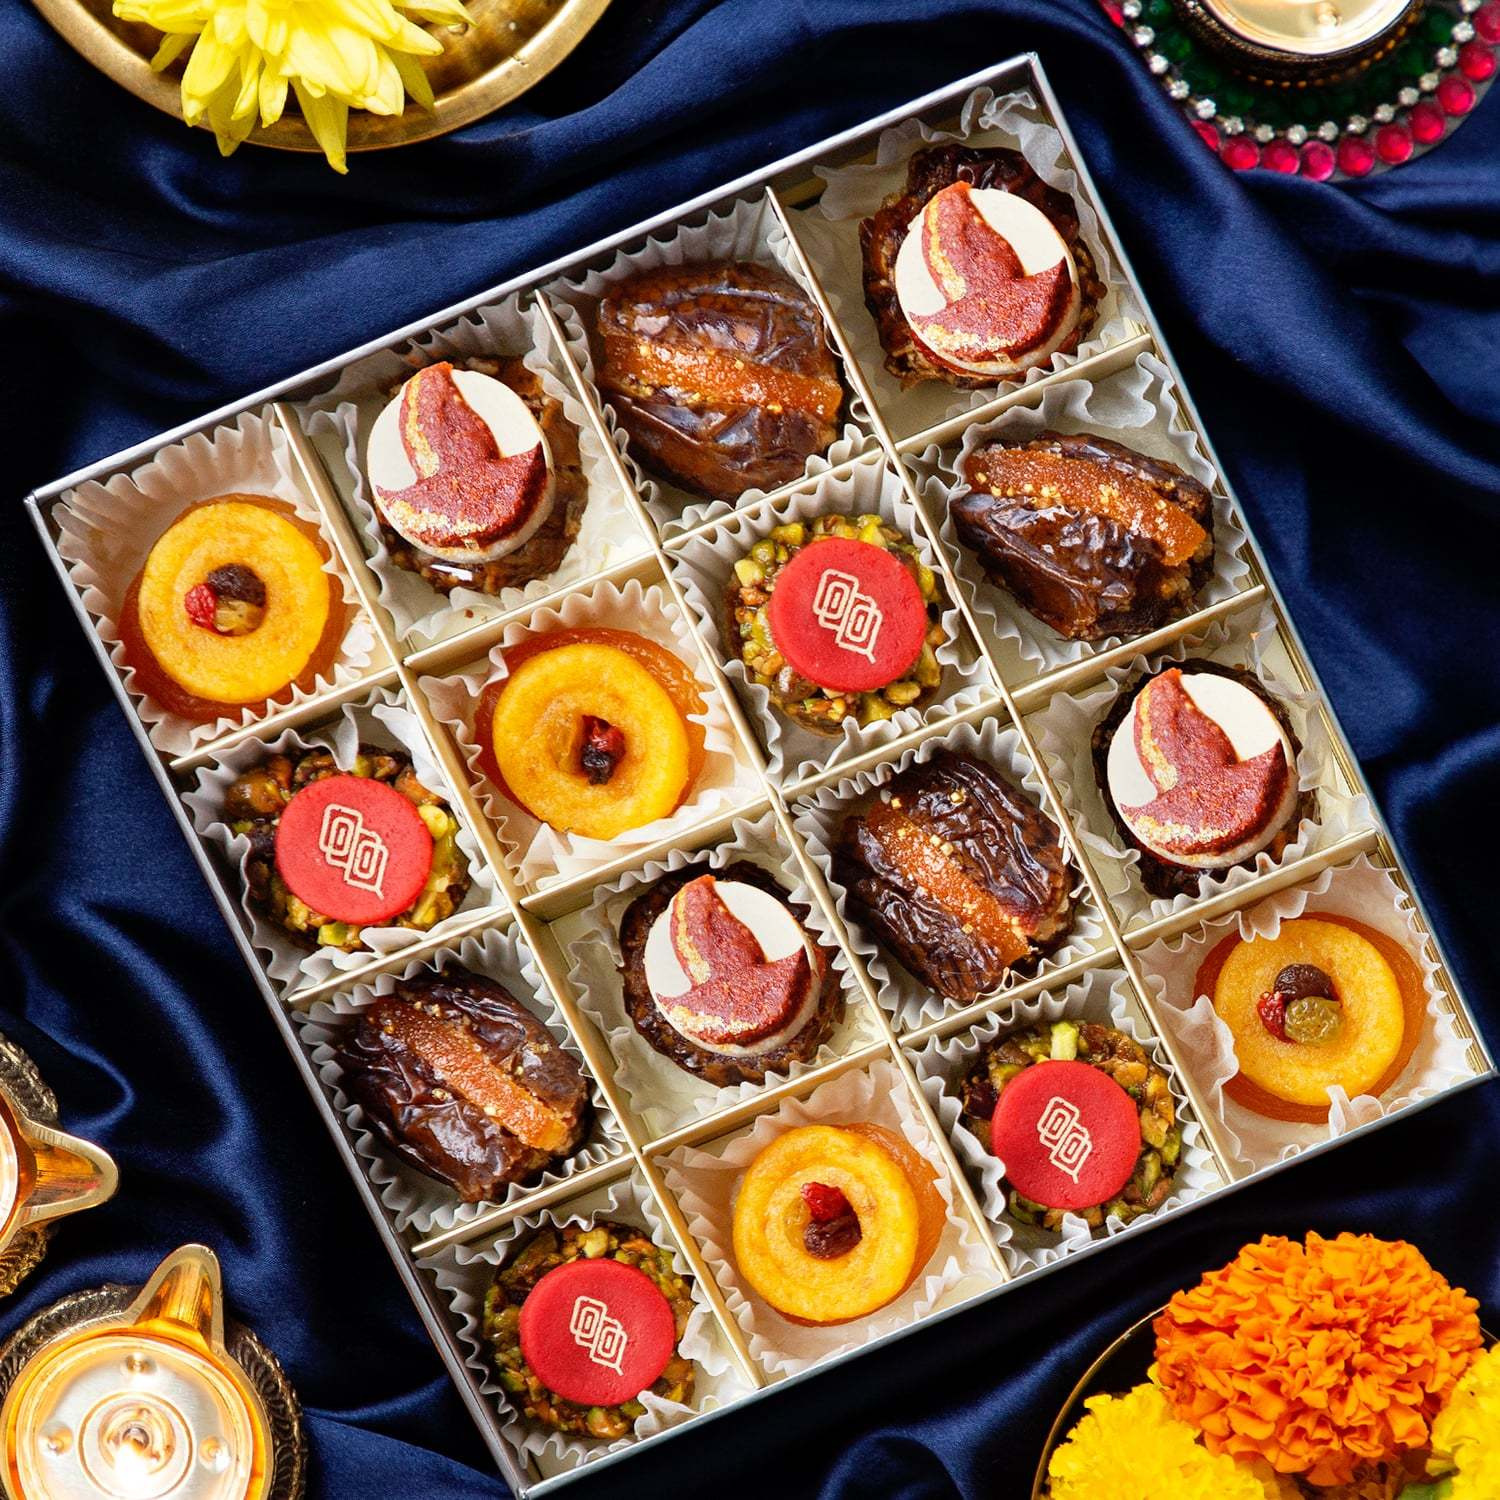 Laumiere Gourmet Fruits - Diwali Collection - Square - Dried Fruits and Nuts Box - Indian Mithai - Sweets - Vegetarian - Healthy